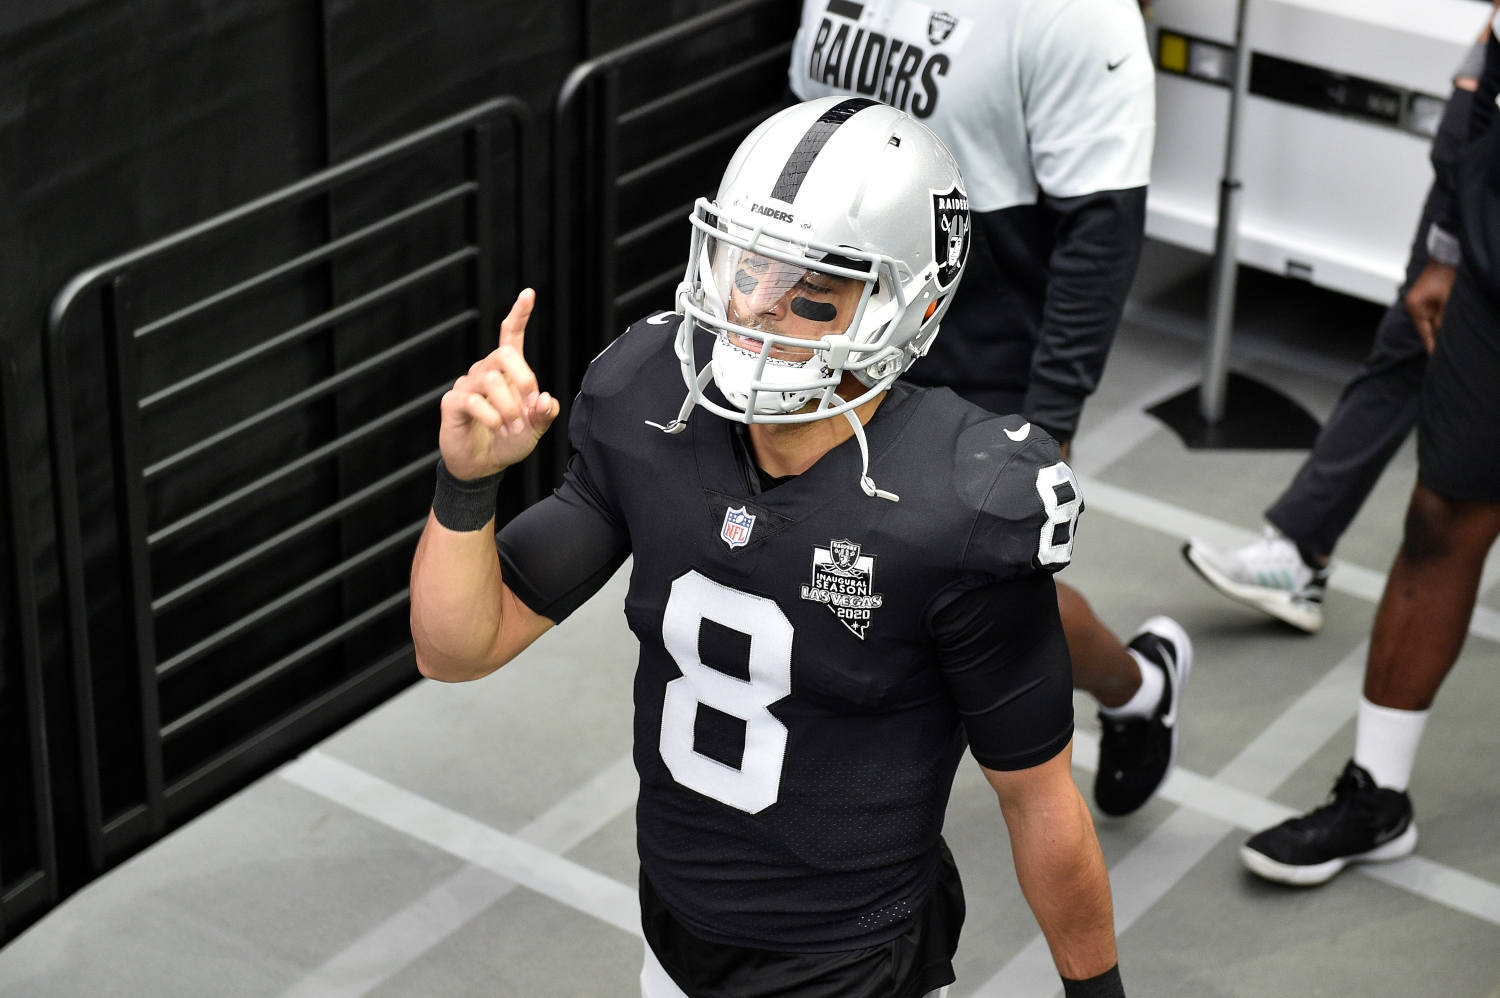 Marcus Mariota takes the field before the Las Vegas Raiders play the Indianapolis Colts on Dec. 13, 2020.